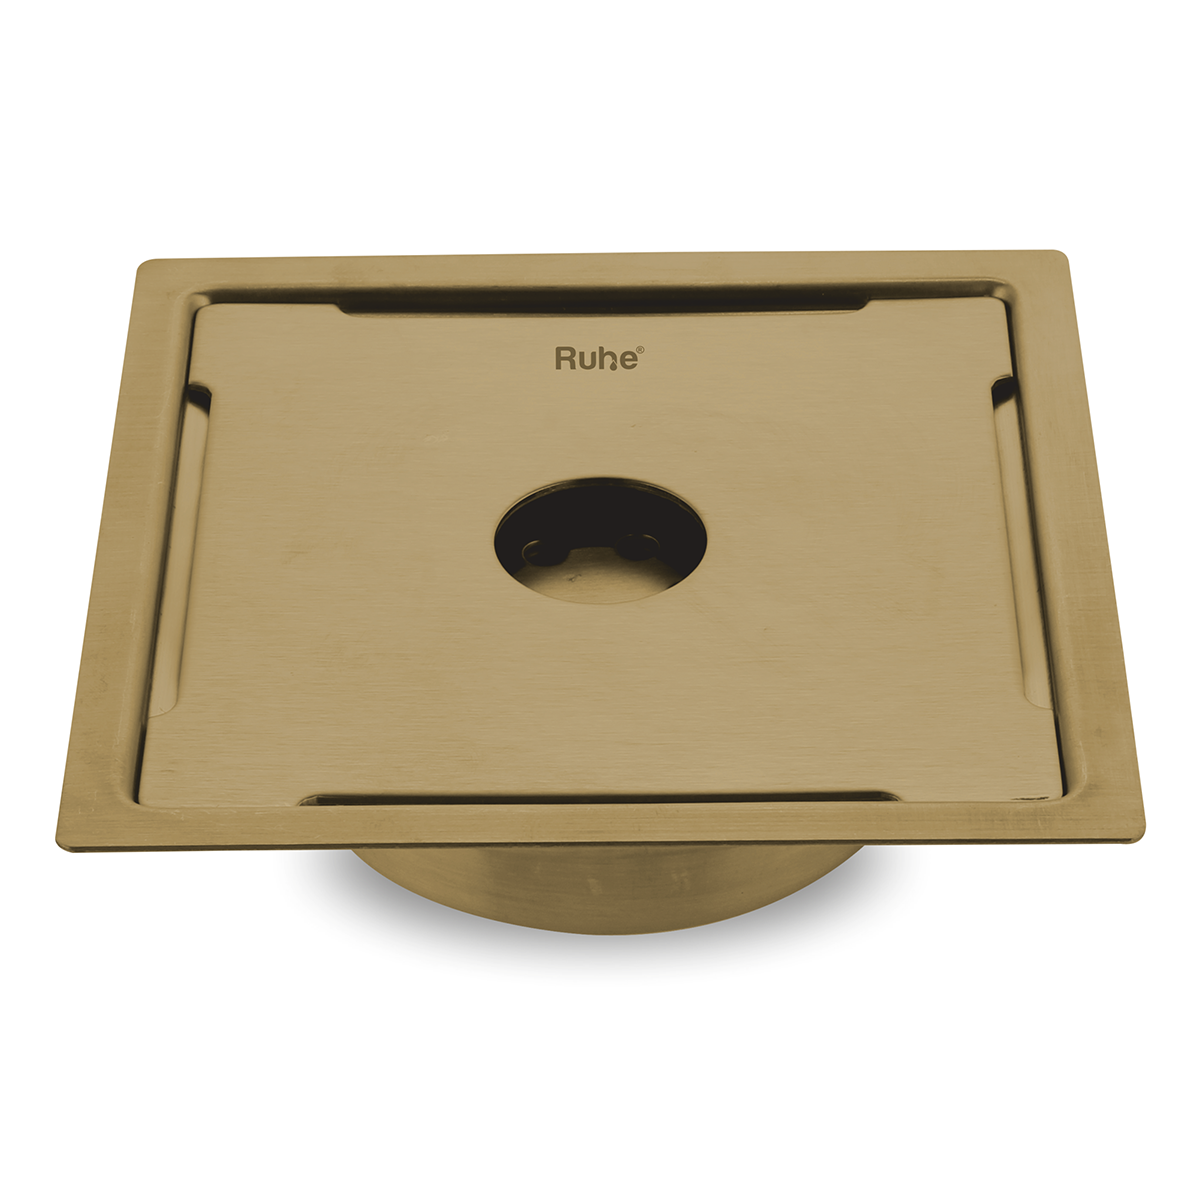 Diamond Square Flat Cut Floor Drain in Yellow Gold PVD Coating (5 x 5 Inches) with Hole